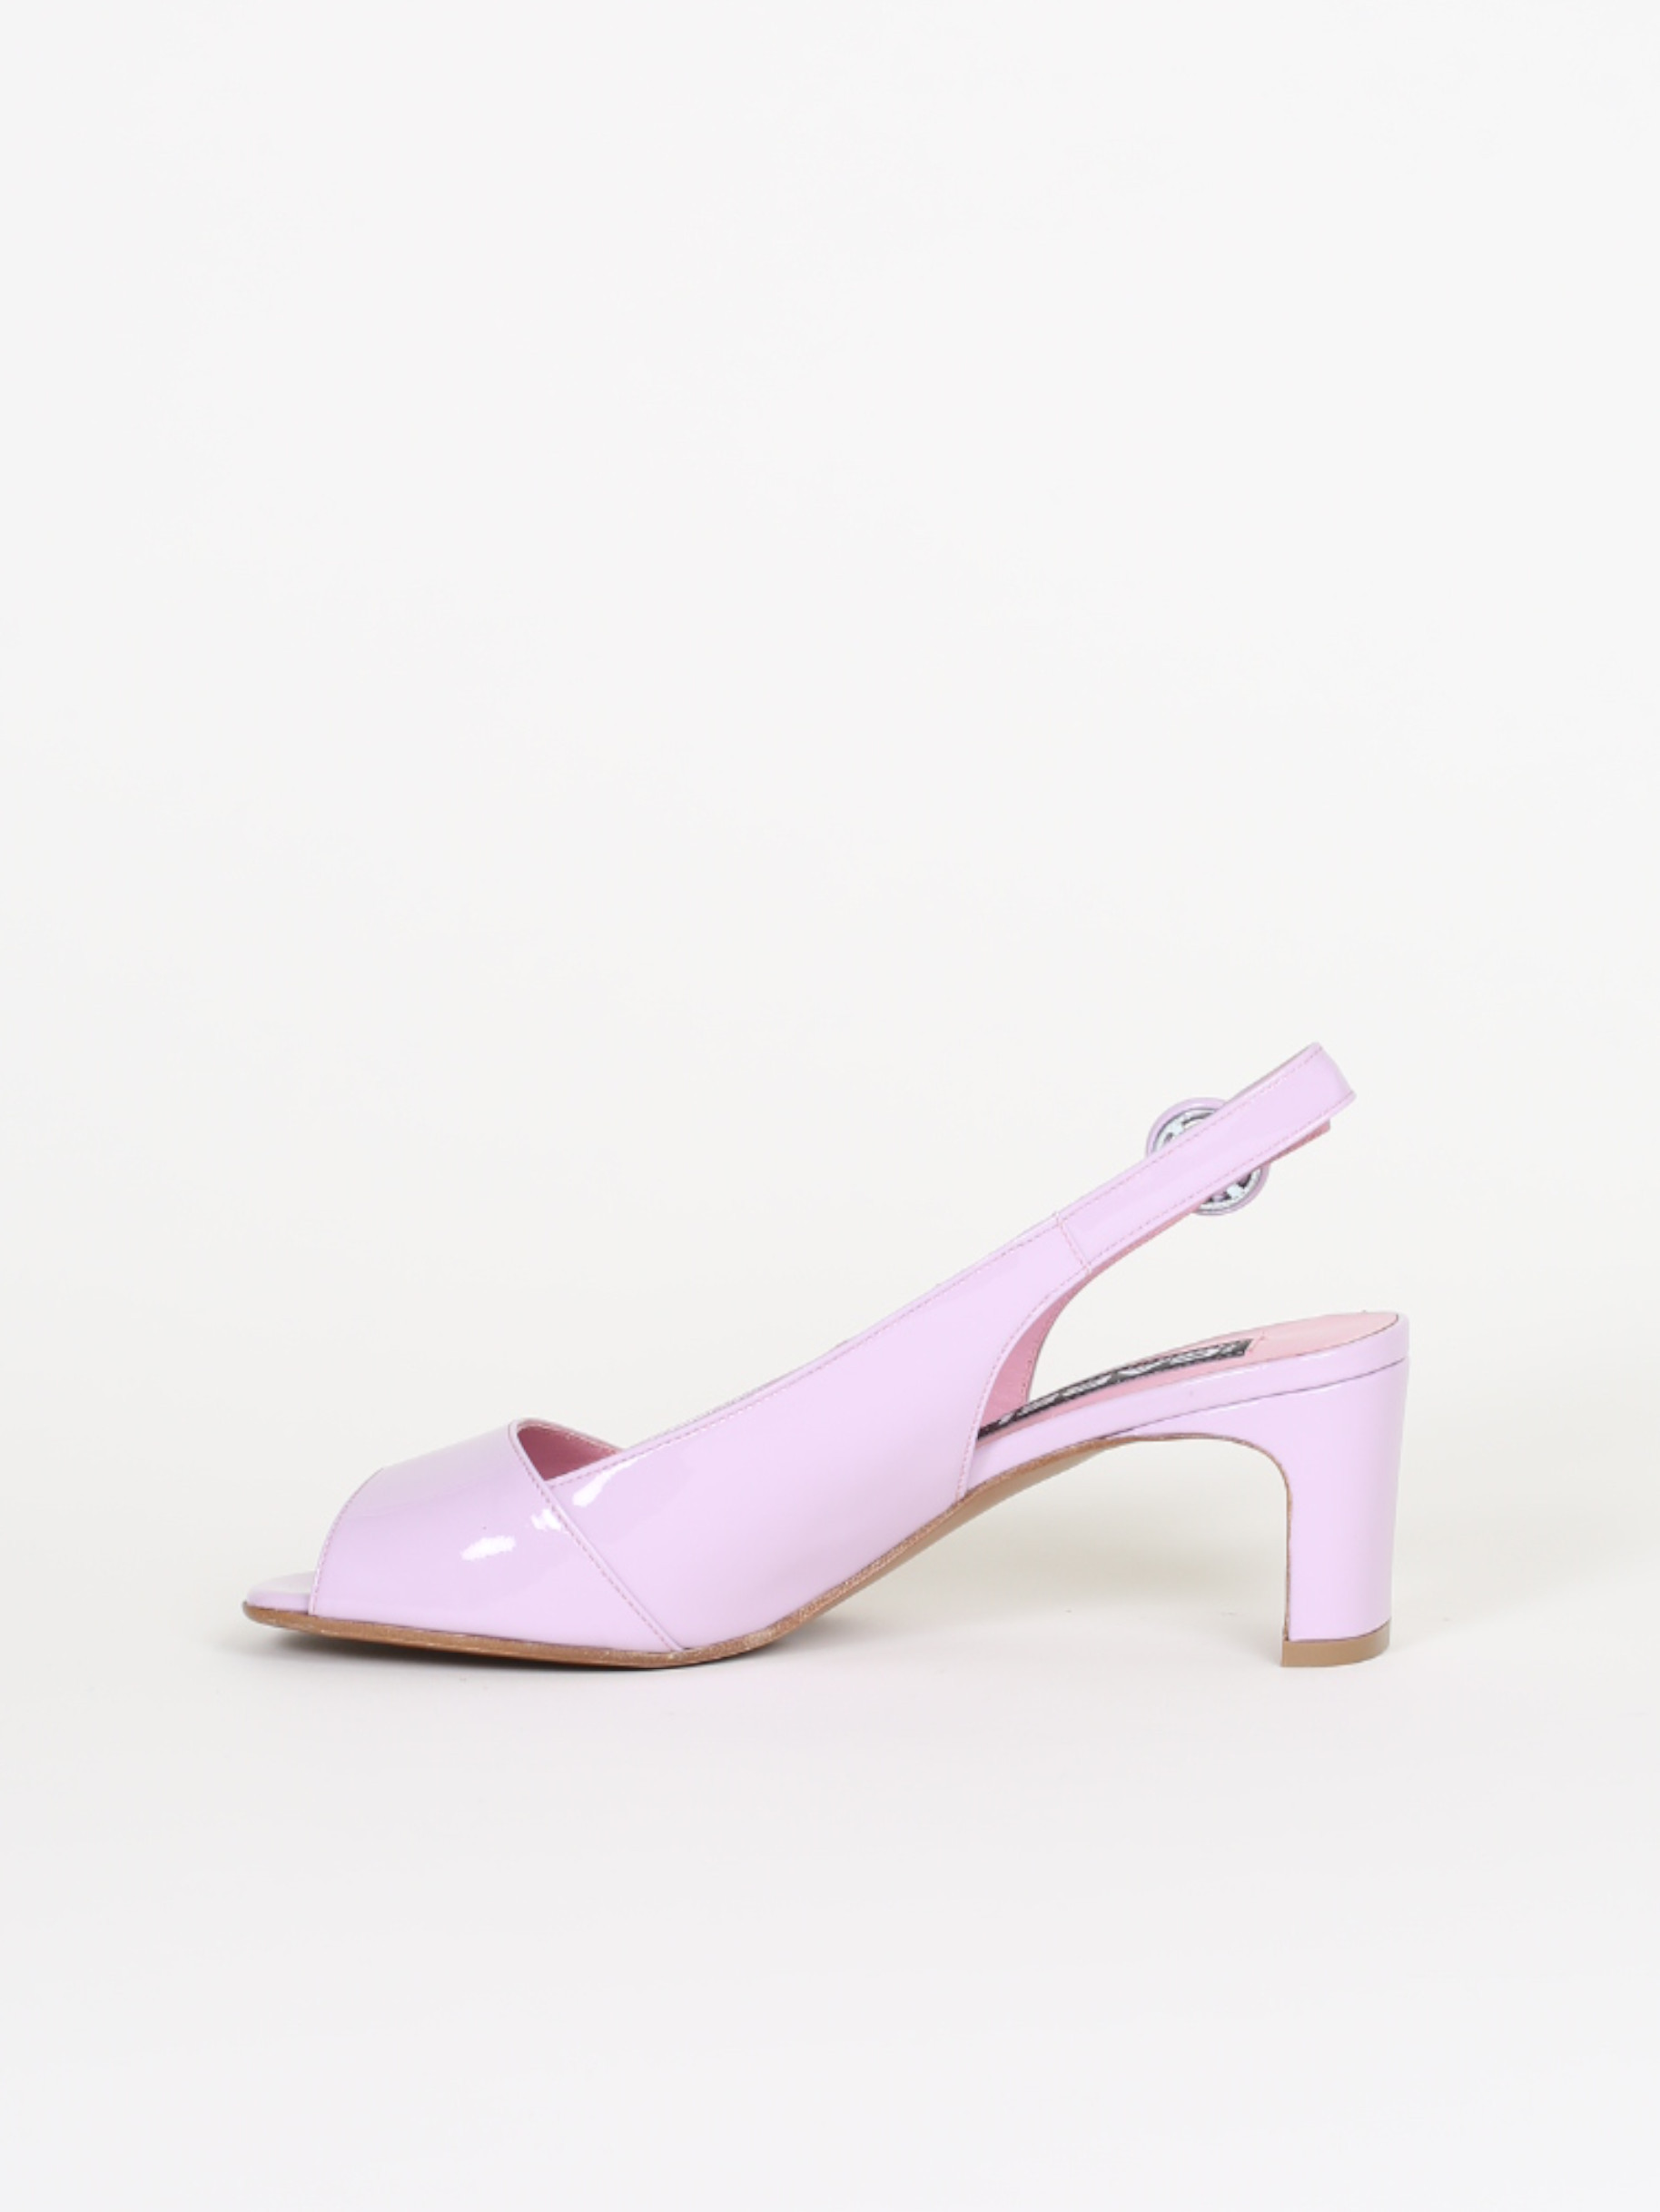 Lilac patent leather sandals